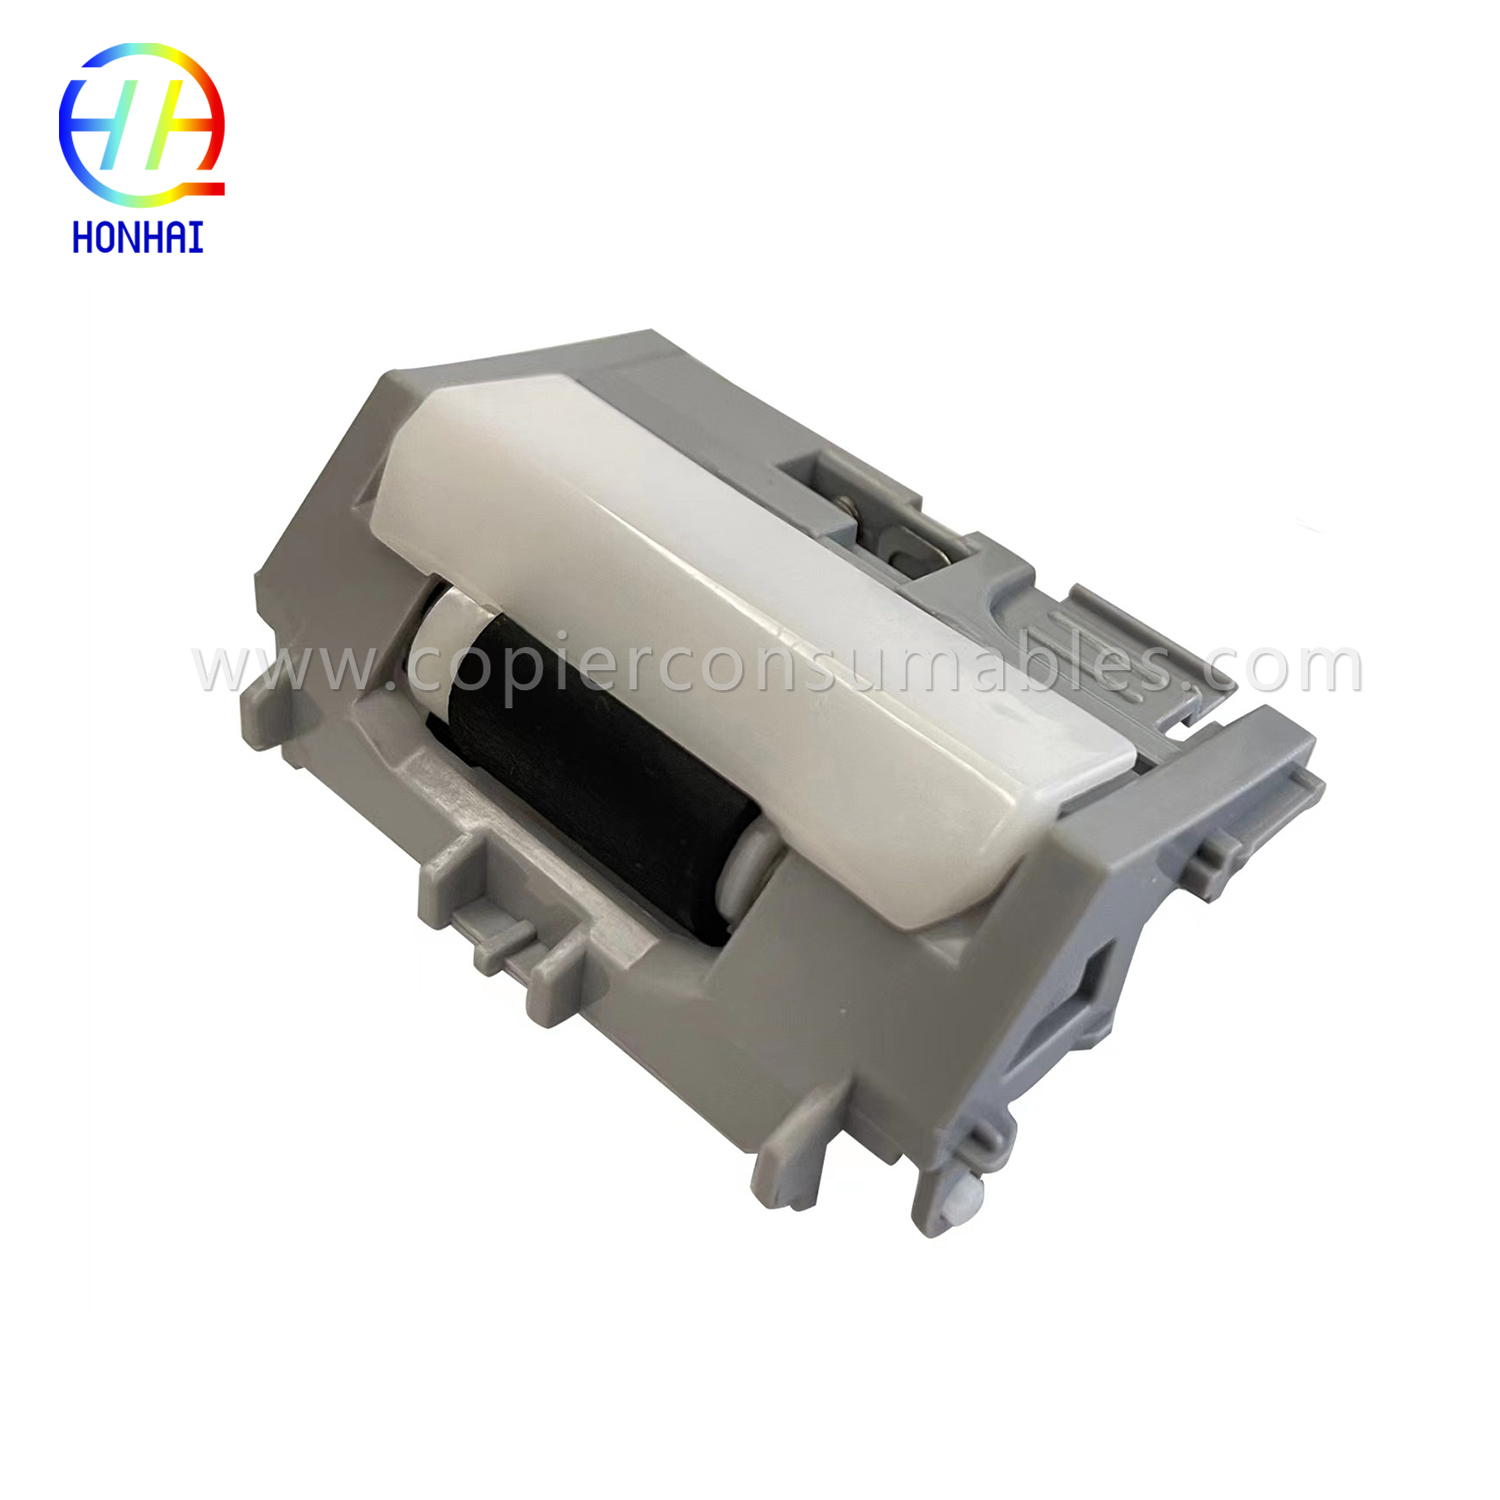 Tray 2 3 Separation Roller Assembly for HP Laserjet PRO M402dn M402dw M402n M403D M403dn M403dw M403n M501dn M501n Mfp-M426dw M426fdn M426fdw RM2-5745-000CN